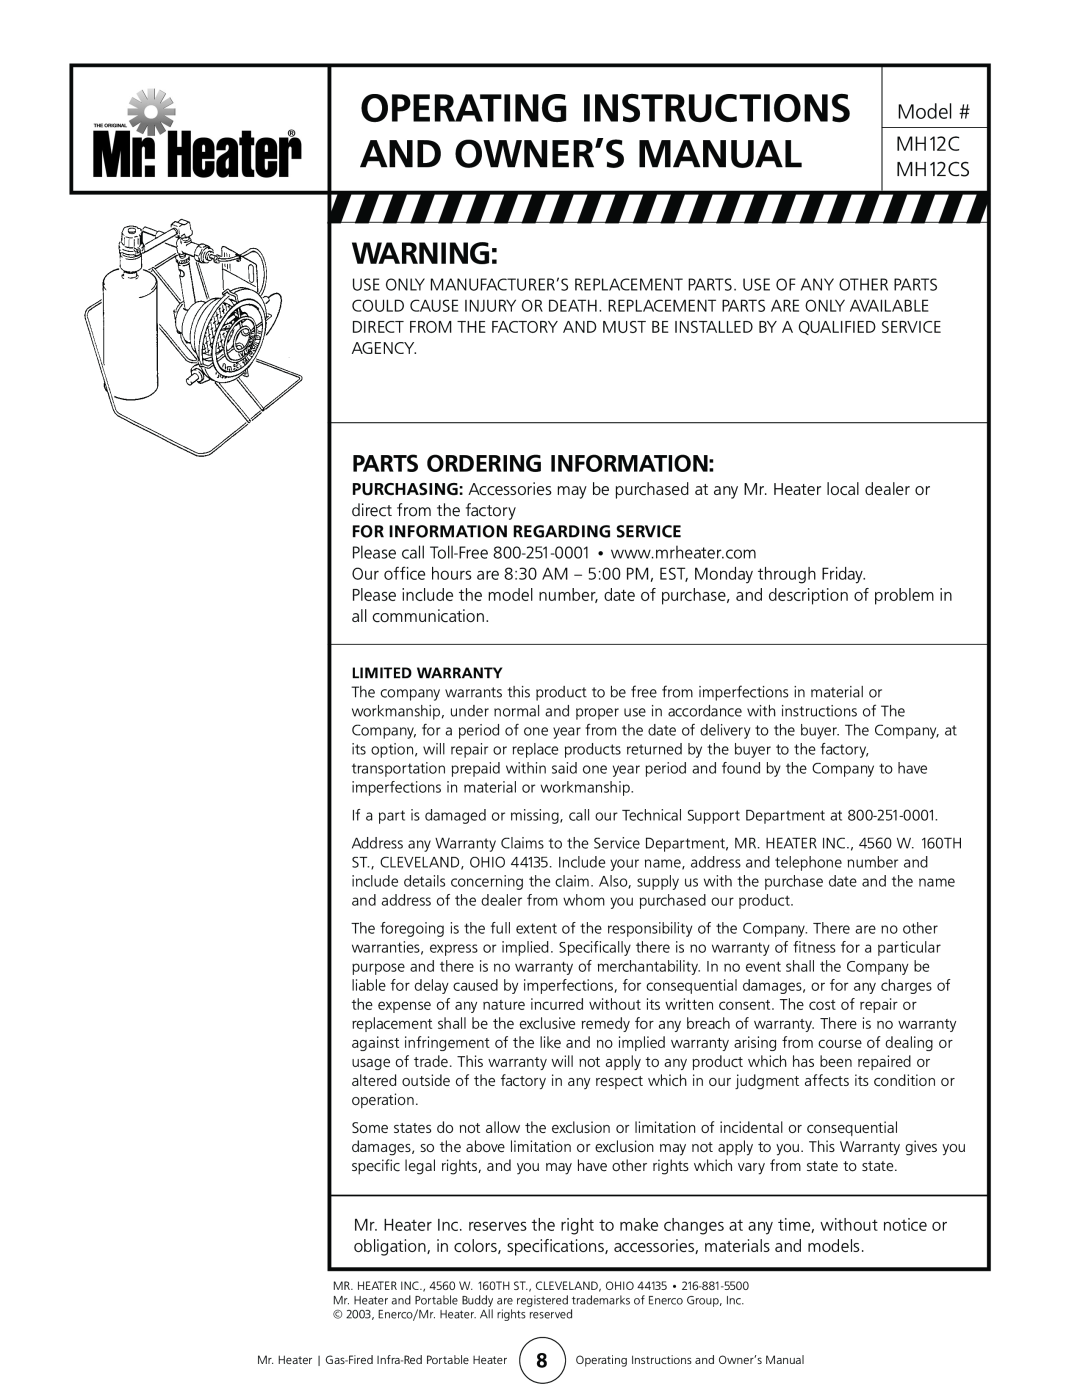 Enerco MH12CS owner manual Parts Ordering Information, For Information Regarding Service 